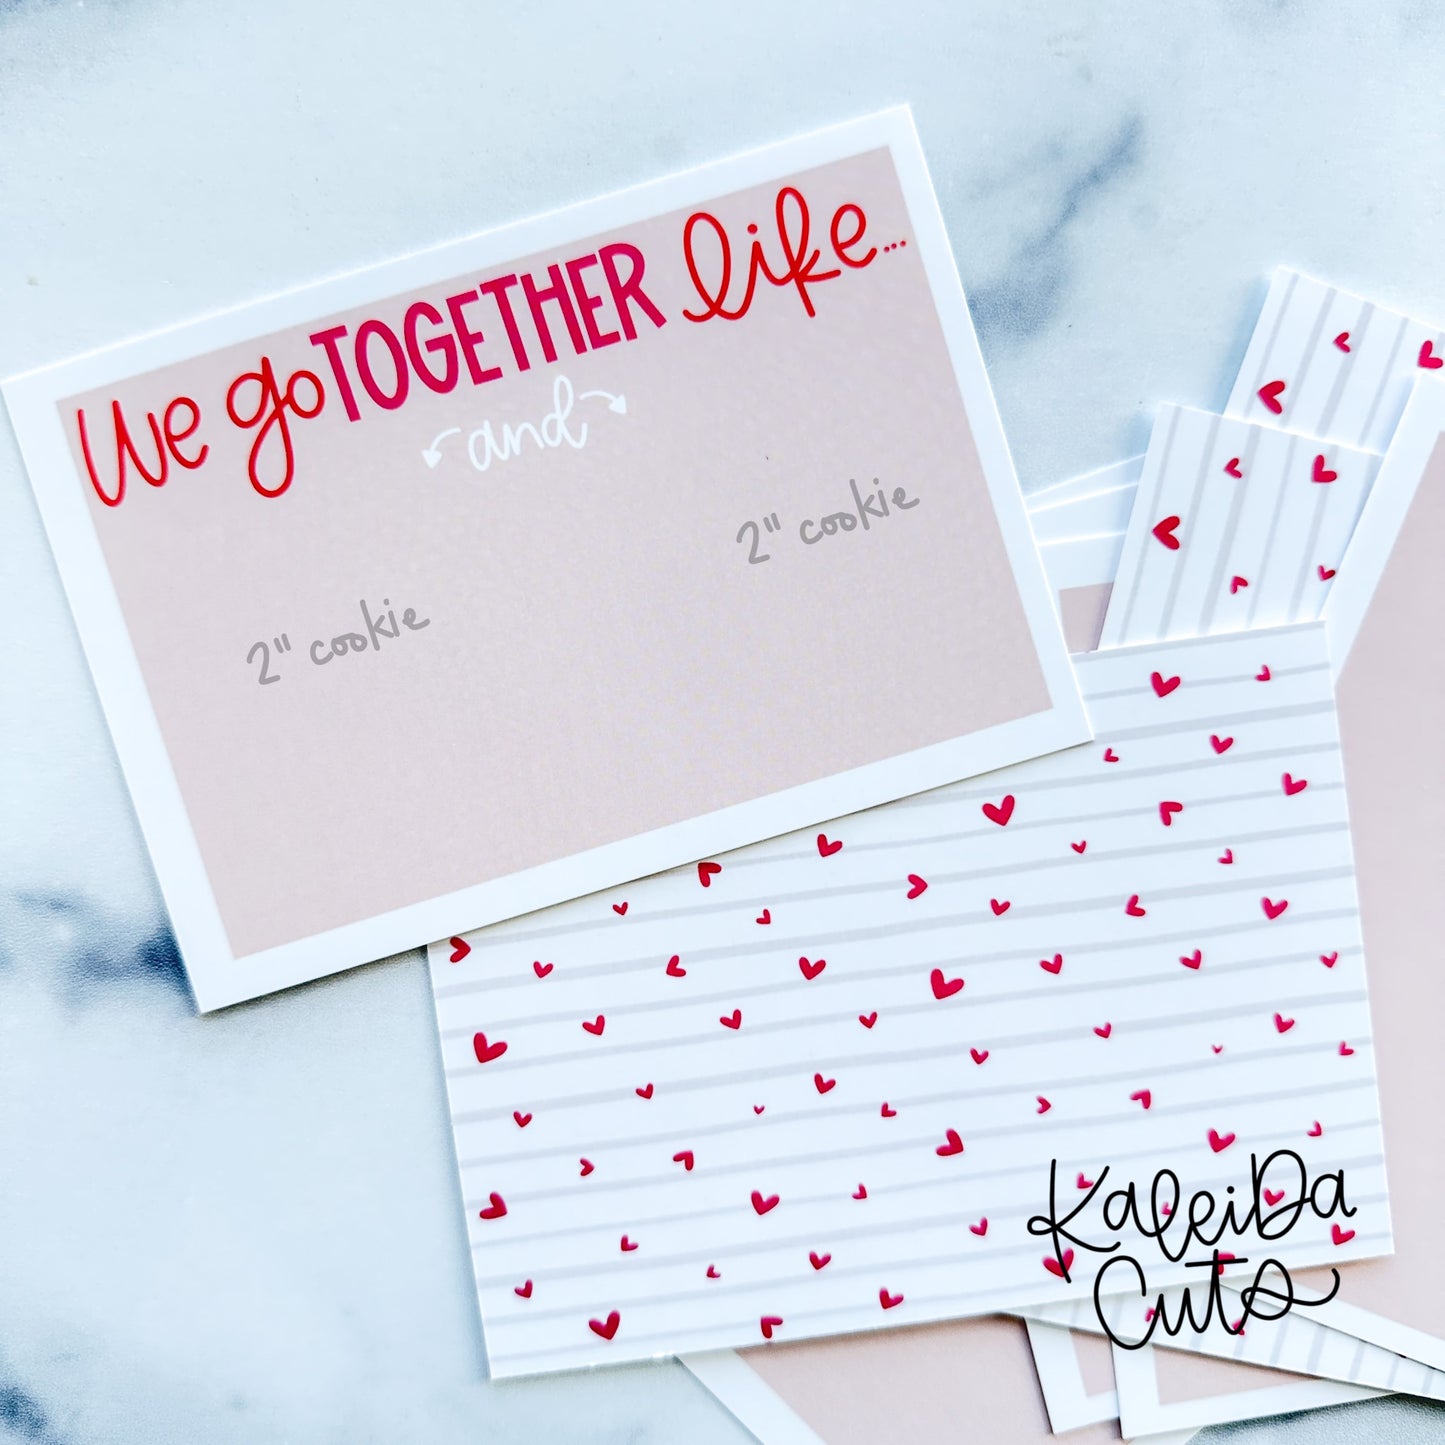 We Go Together Like Cookie Card 3.5" x 5" Pre-Printed Pack of 25